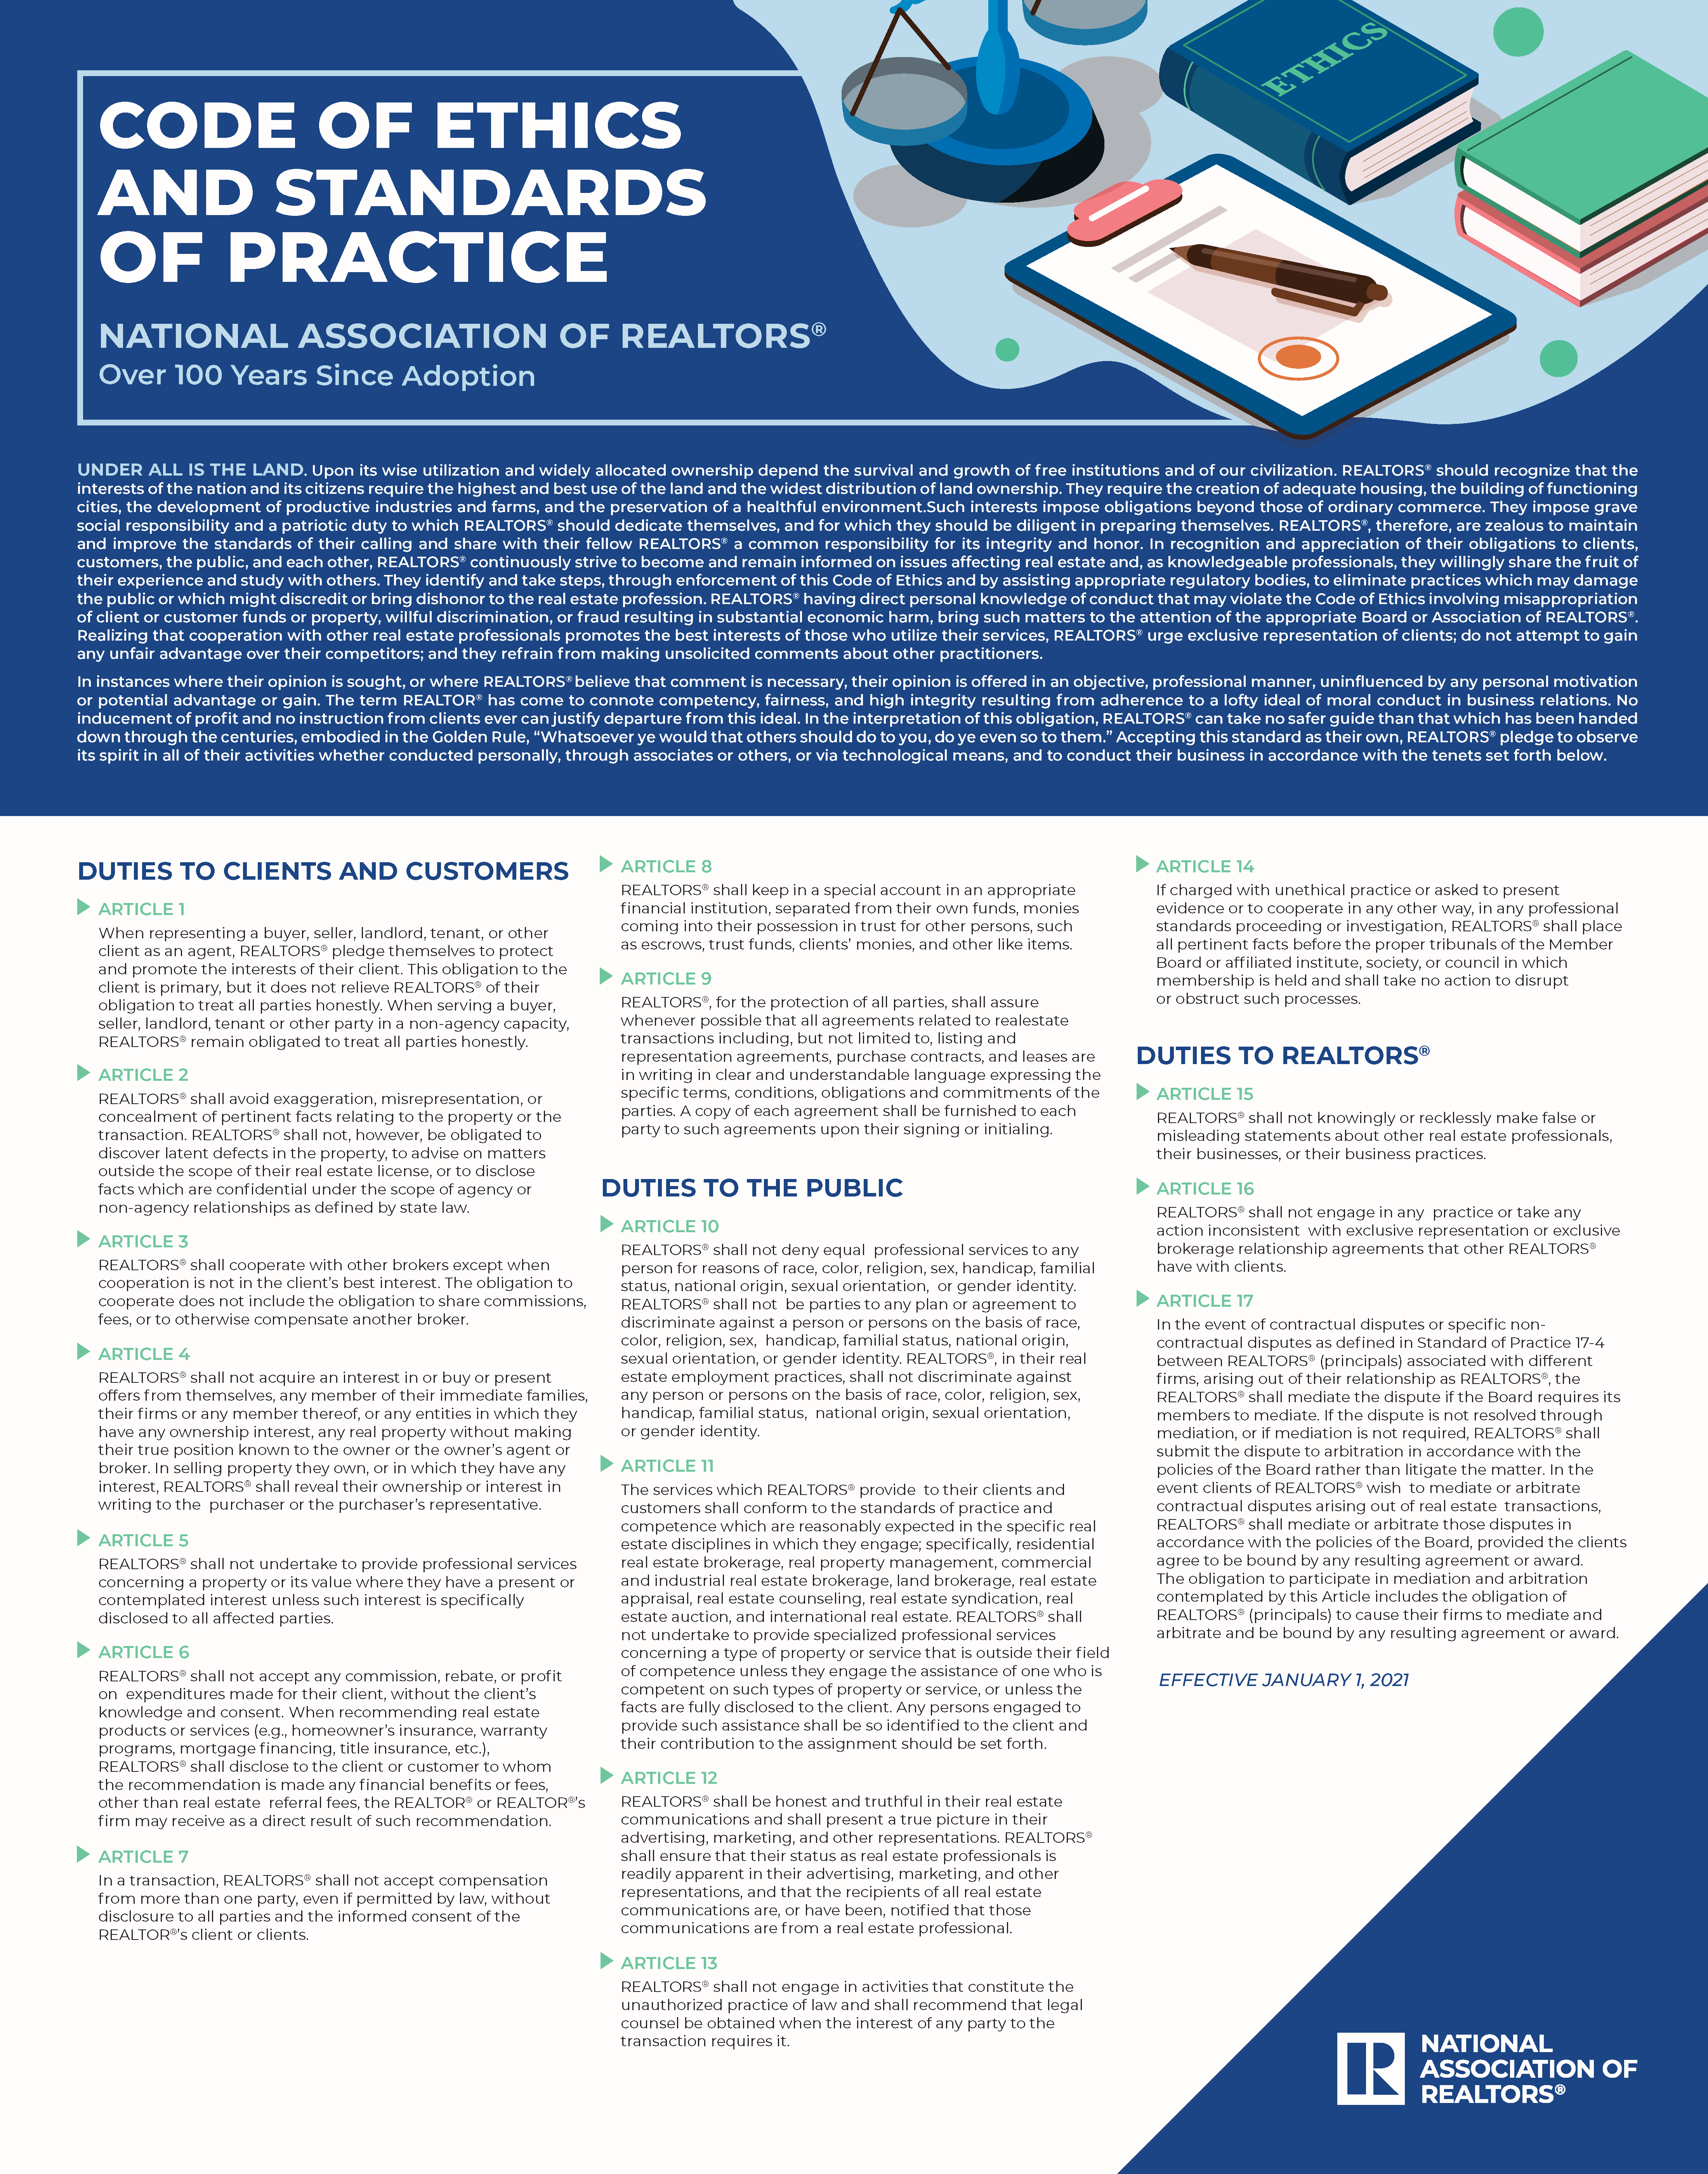 2021-03-26-COE-Standards-of-practice-color-poster